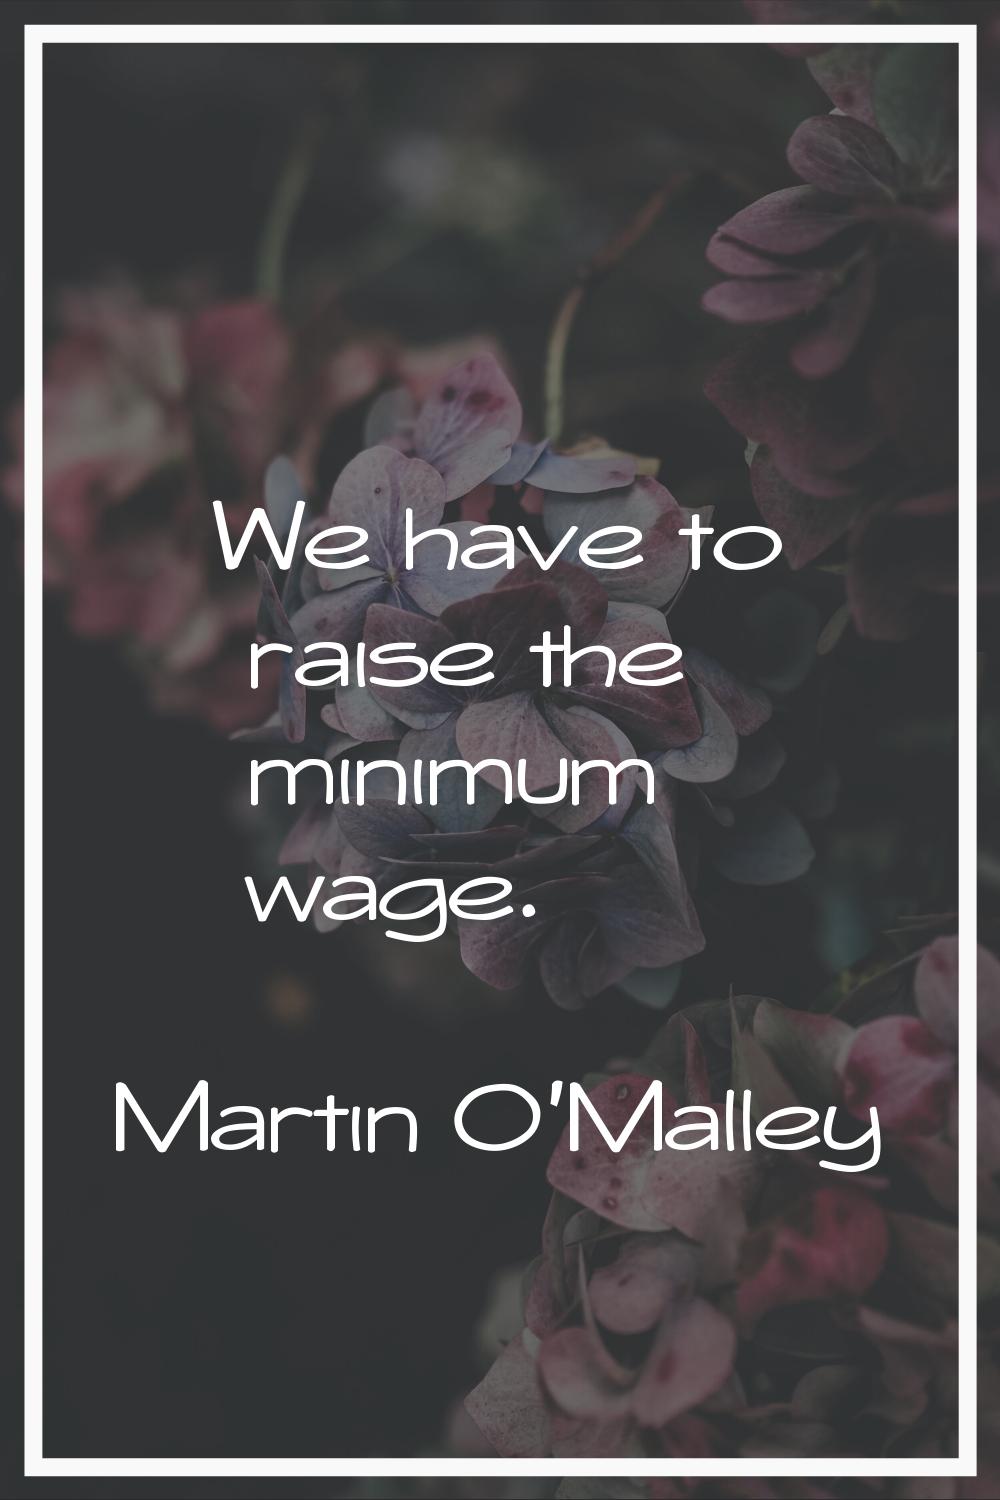 We have to raise the minimum wage.